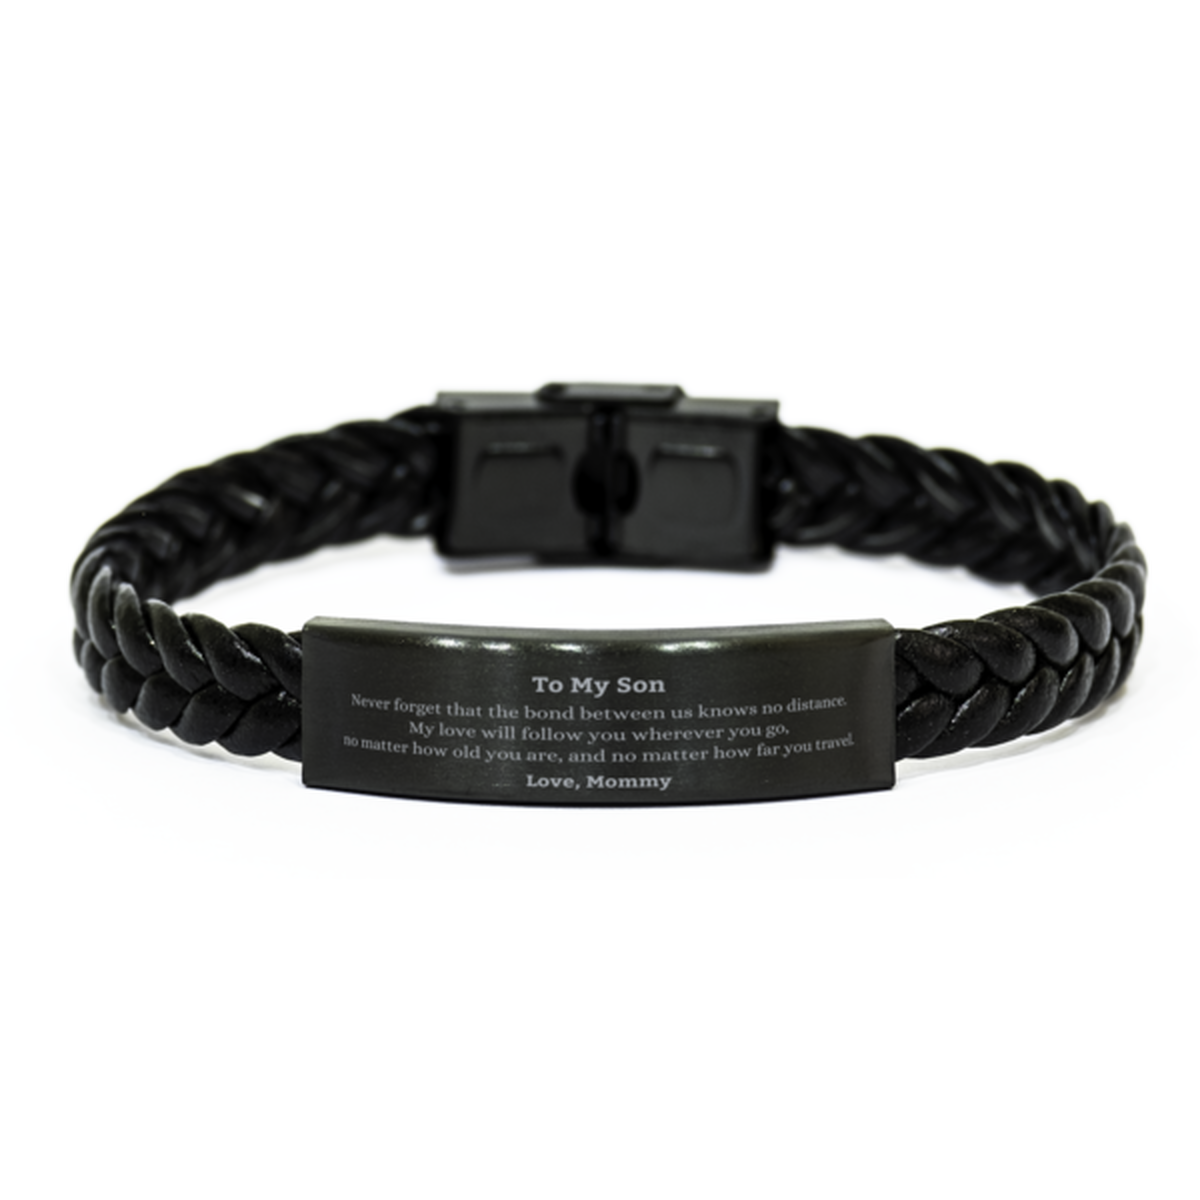 Son Birthday Gifts from Mommy, Adjustable Braided Leather Bracelet for Son Christmas Graduation Unique Gifts Son Never forget that the bond between us knows no distance. Love, Mommy